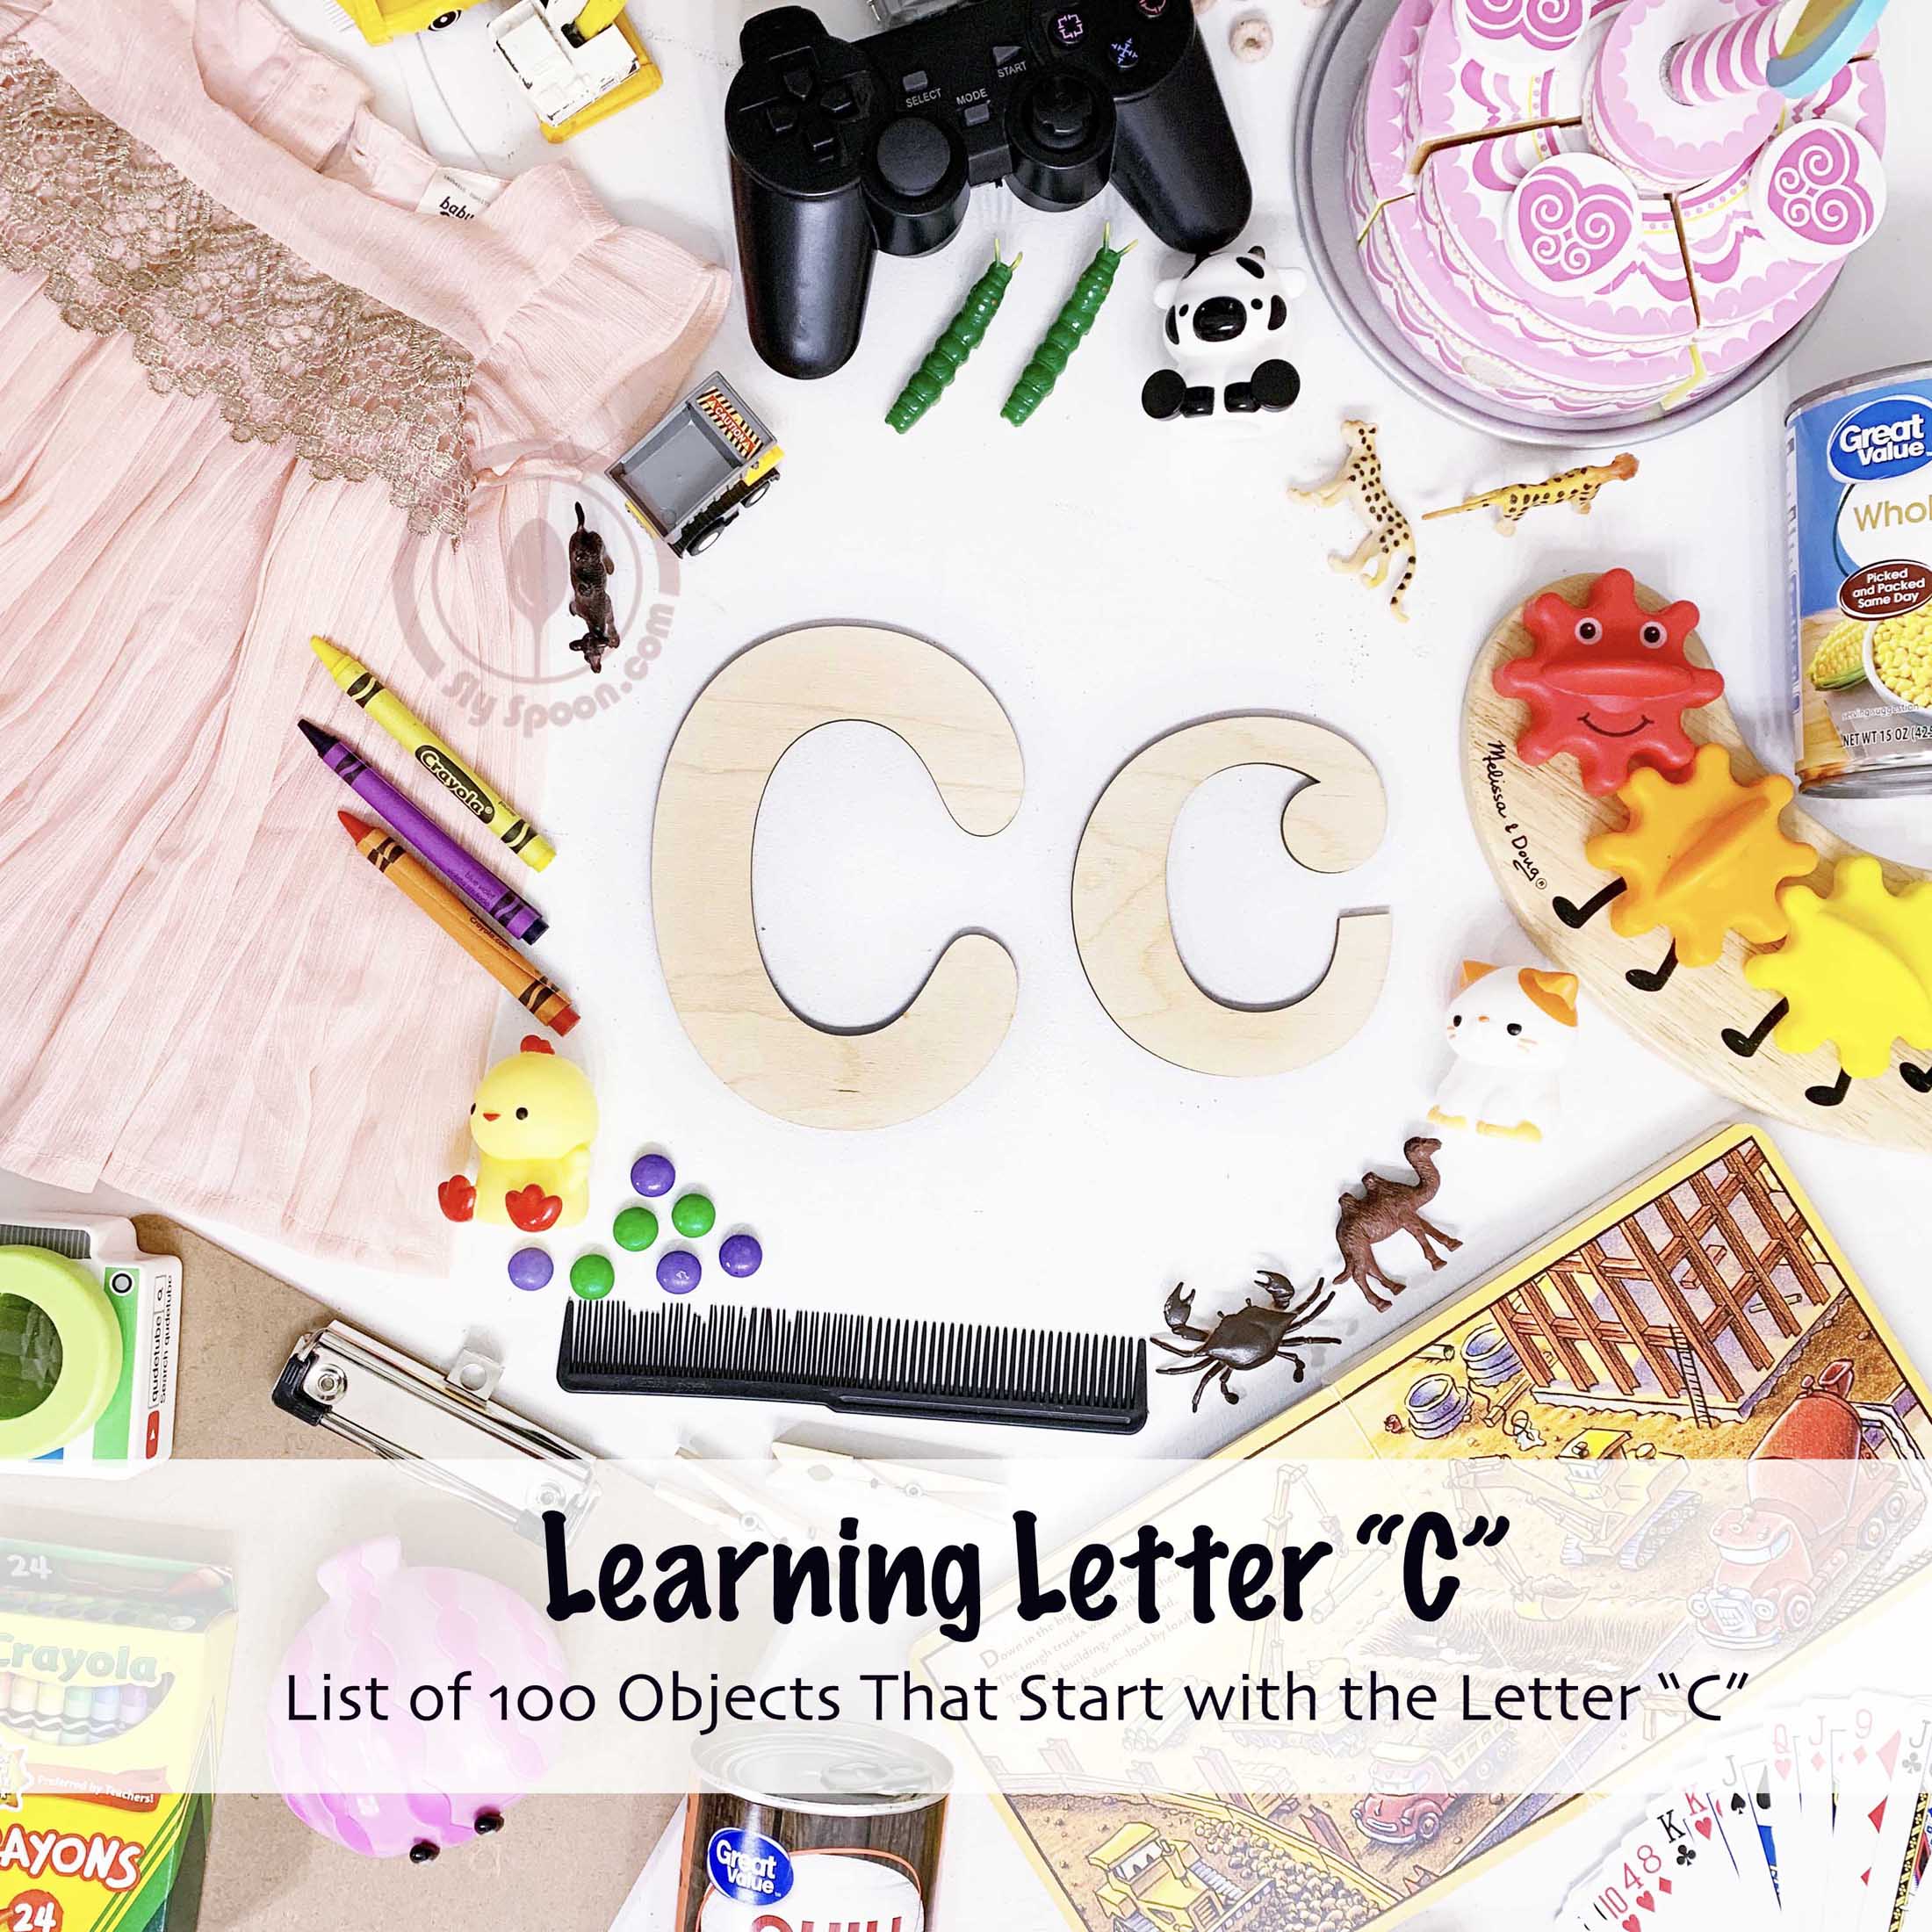 Image of objects that start with the letter C